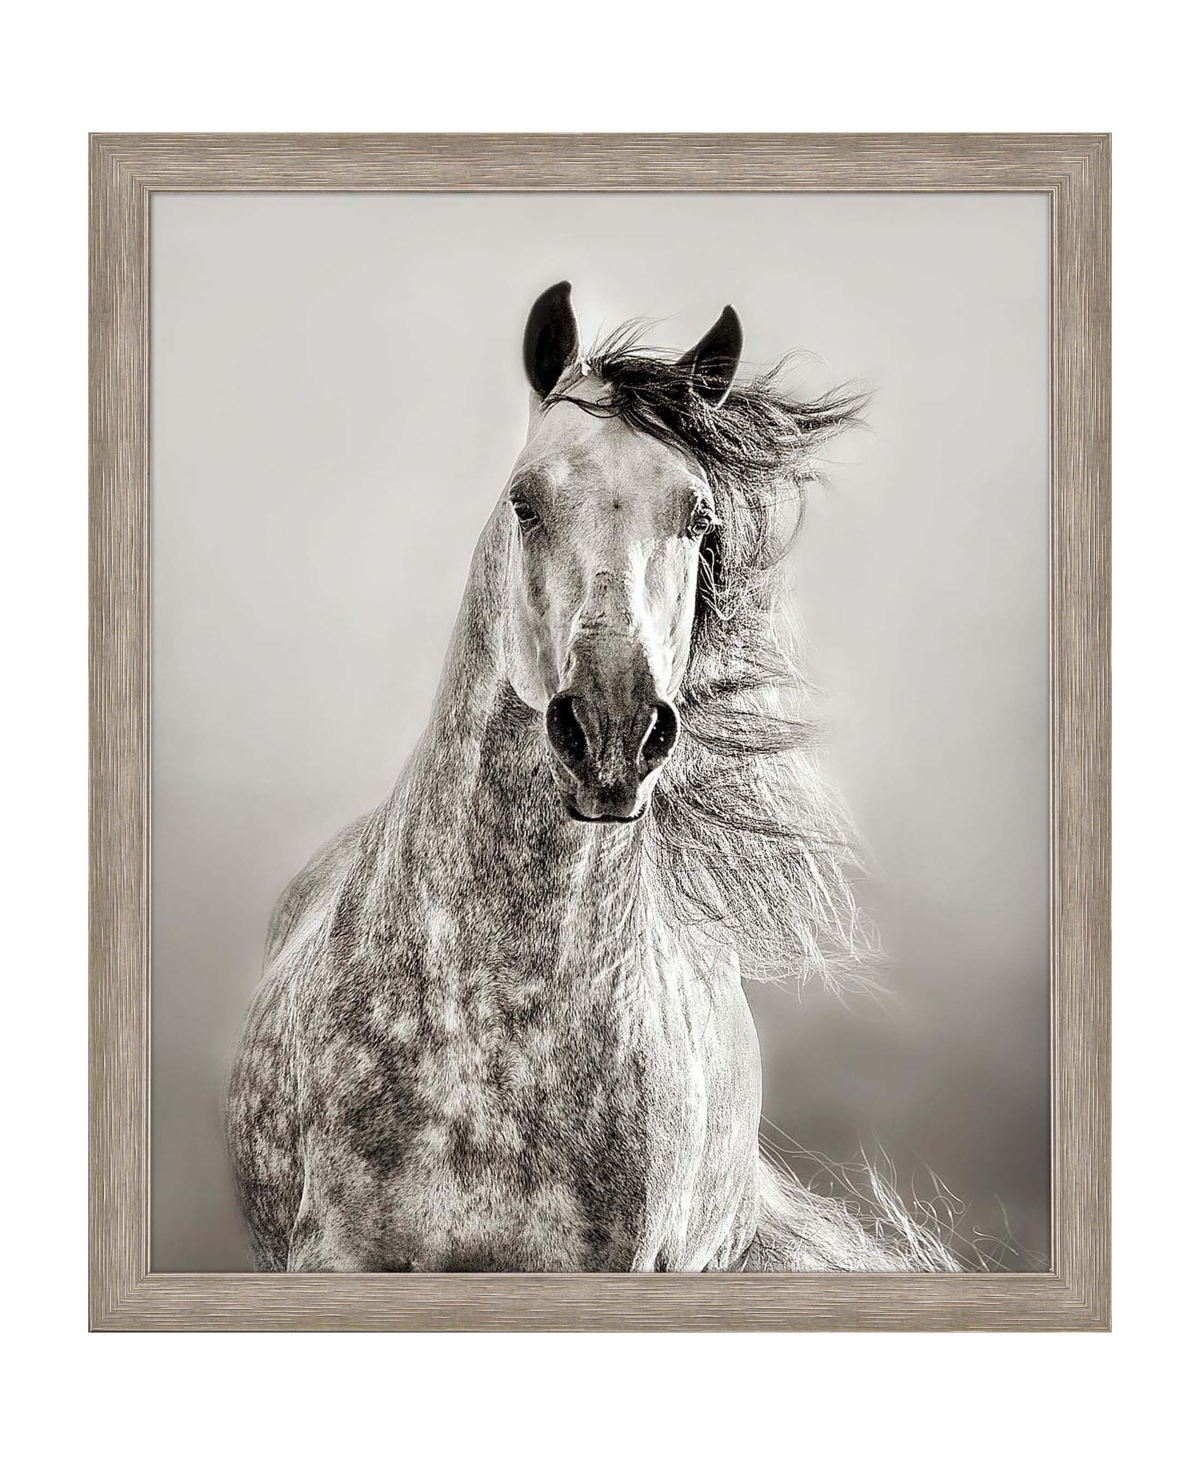 Paragon Picture Gallery Caballo De Andaluz Framed Art In Beige